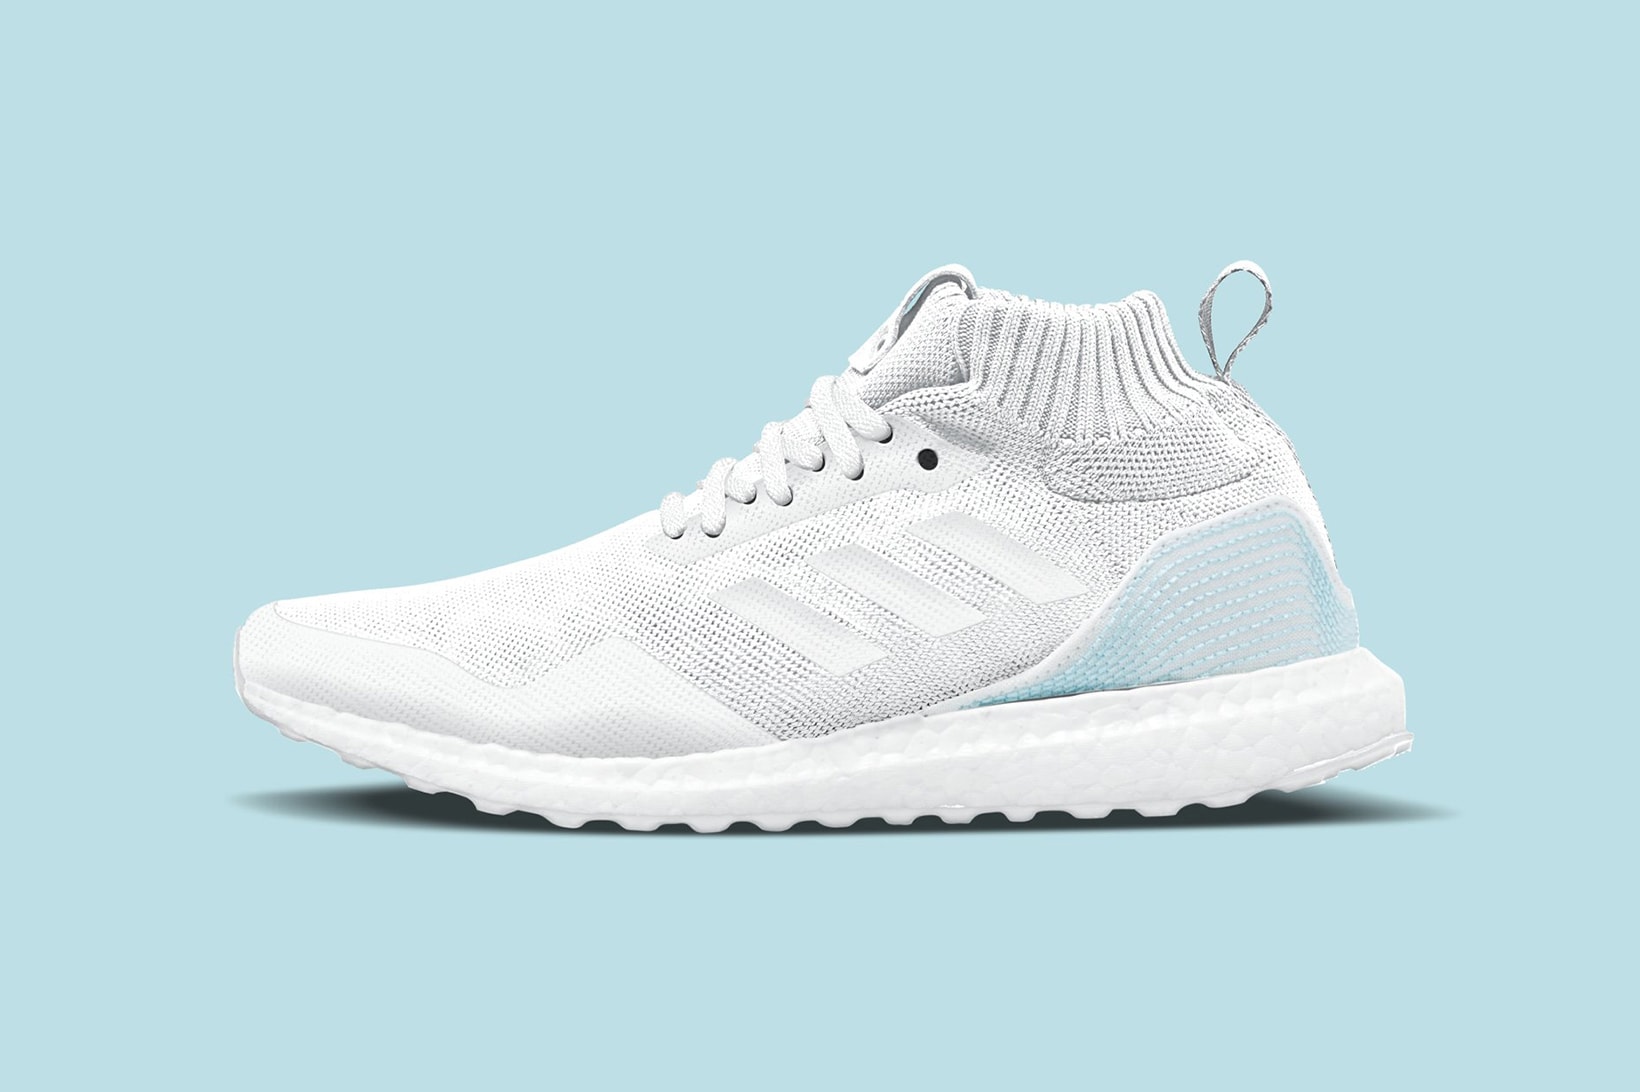 Parley adidas UltraBOOST Mid 2018 February Release Date Info Sneakers Shoes Footwear for the Oceans Collaboration White Blue